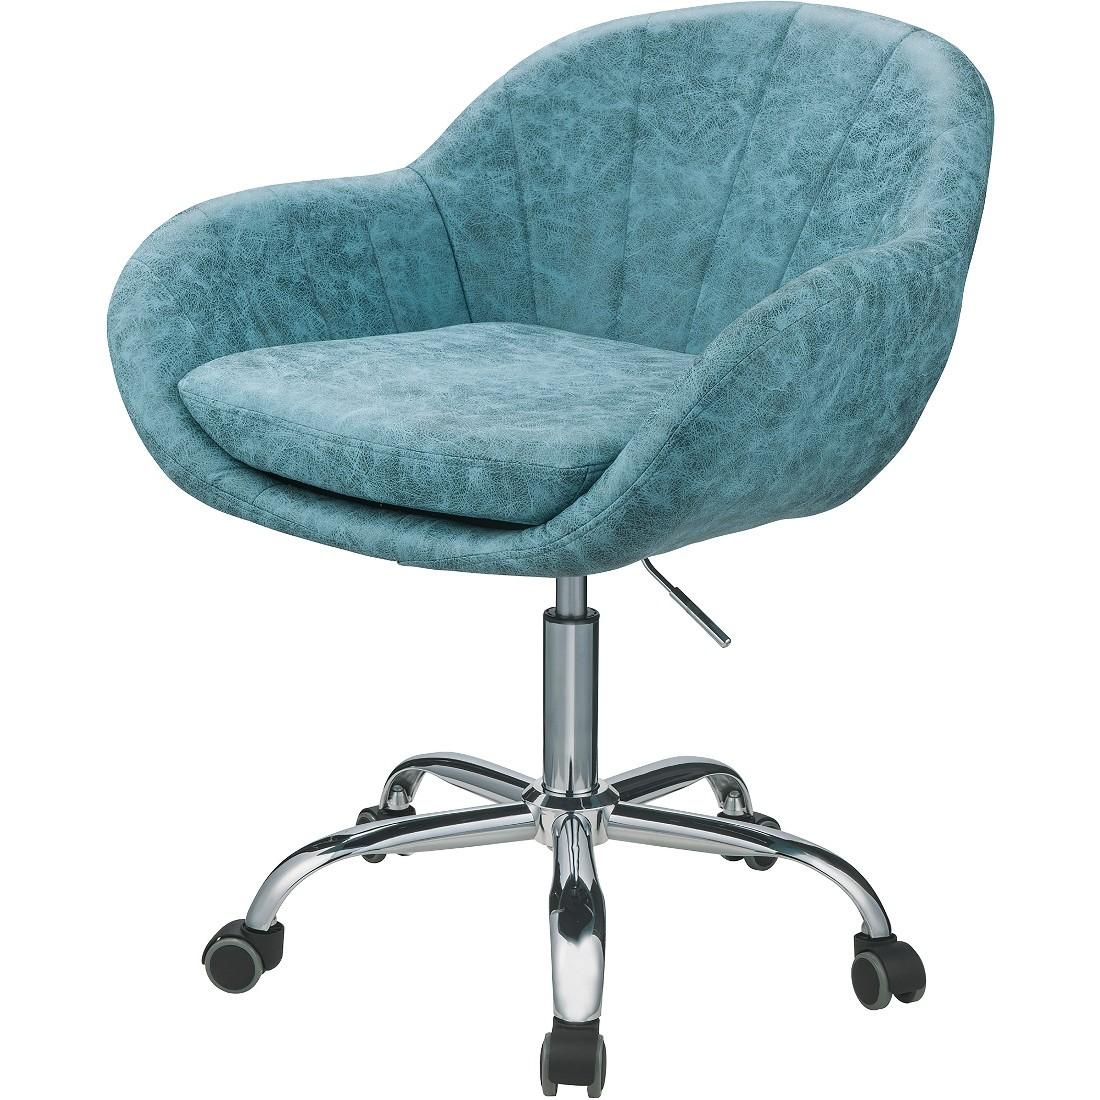 Contemporary Office Chair Giolla Giolla 92502 in Chrome, Turquoise PU